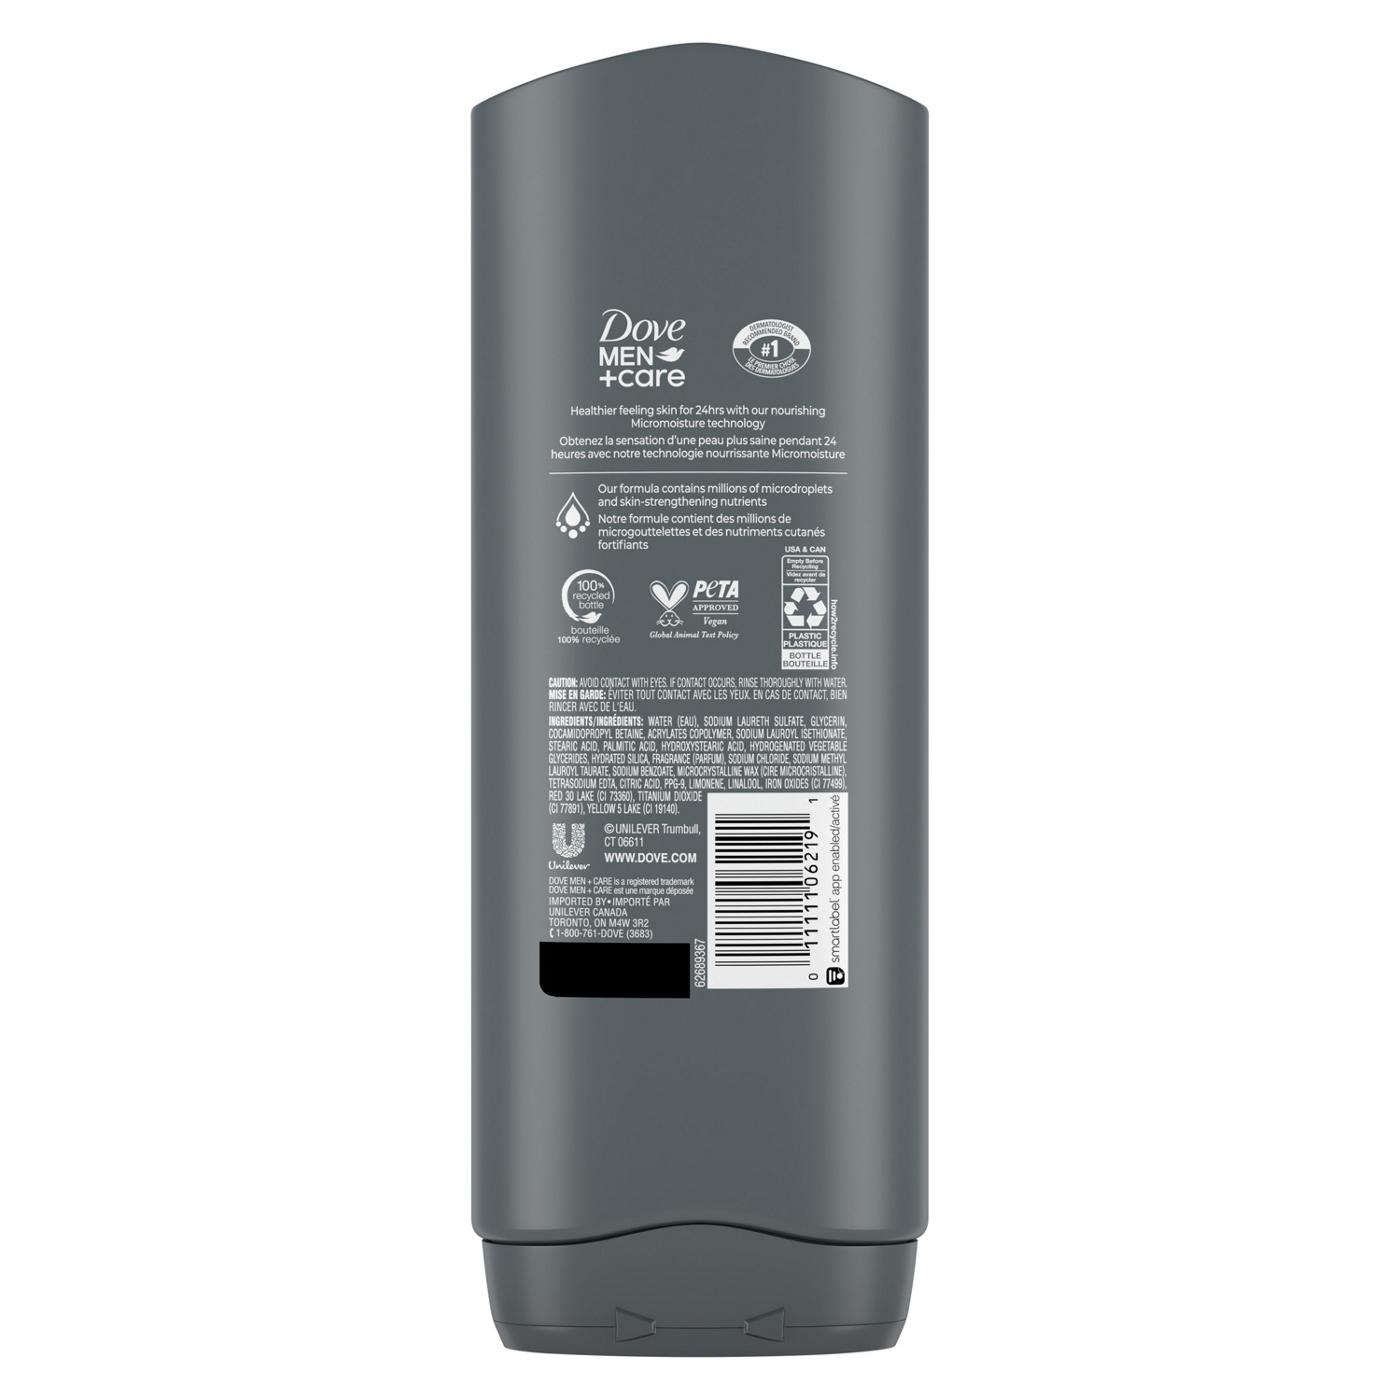 Dove Men+Care Exfoliating Deep Clean Face & Body Wash; image 2 of 3